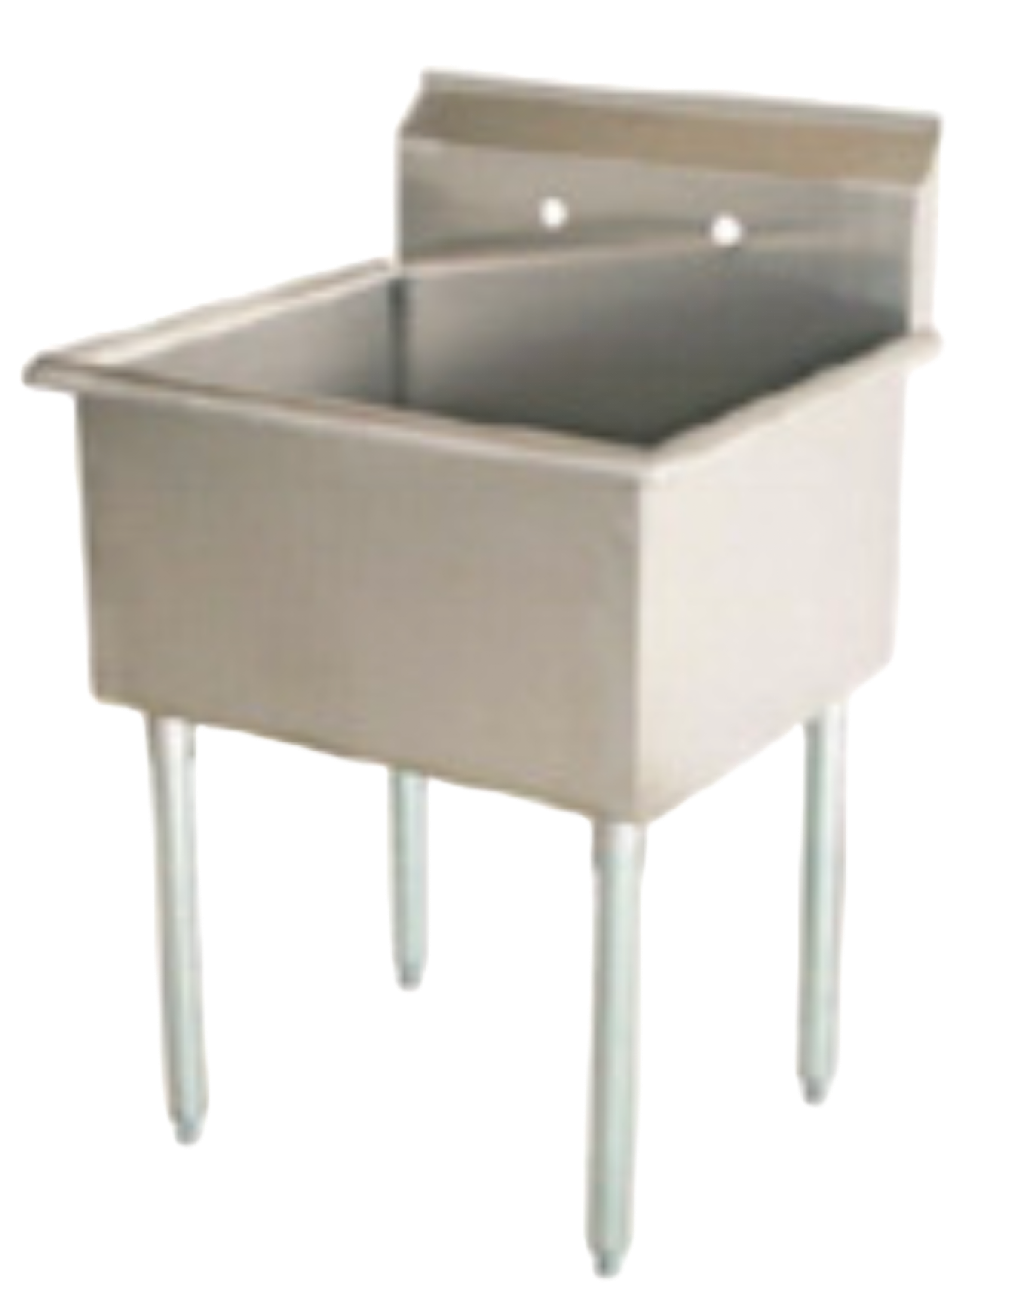 18 Gauge 430S/S Budget Sink, One Comp. Galv. Gusset and Leg, Plastic Bullet Feet, Strainer included